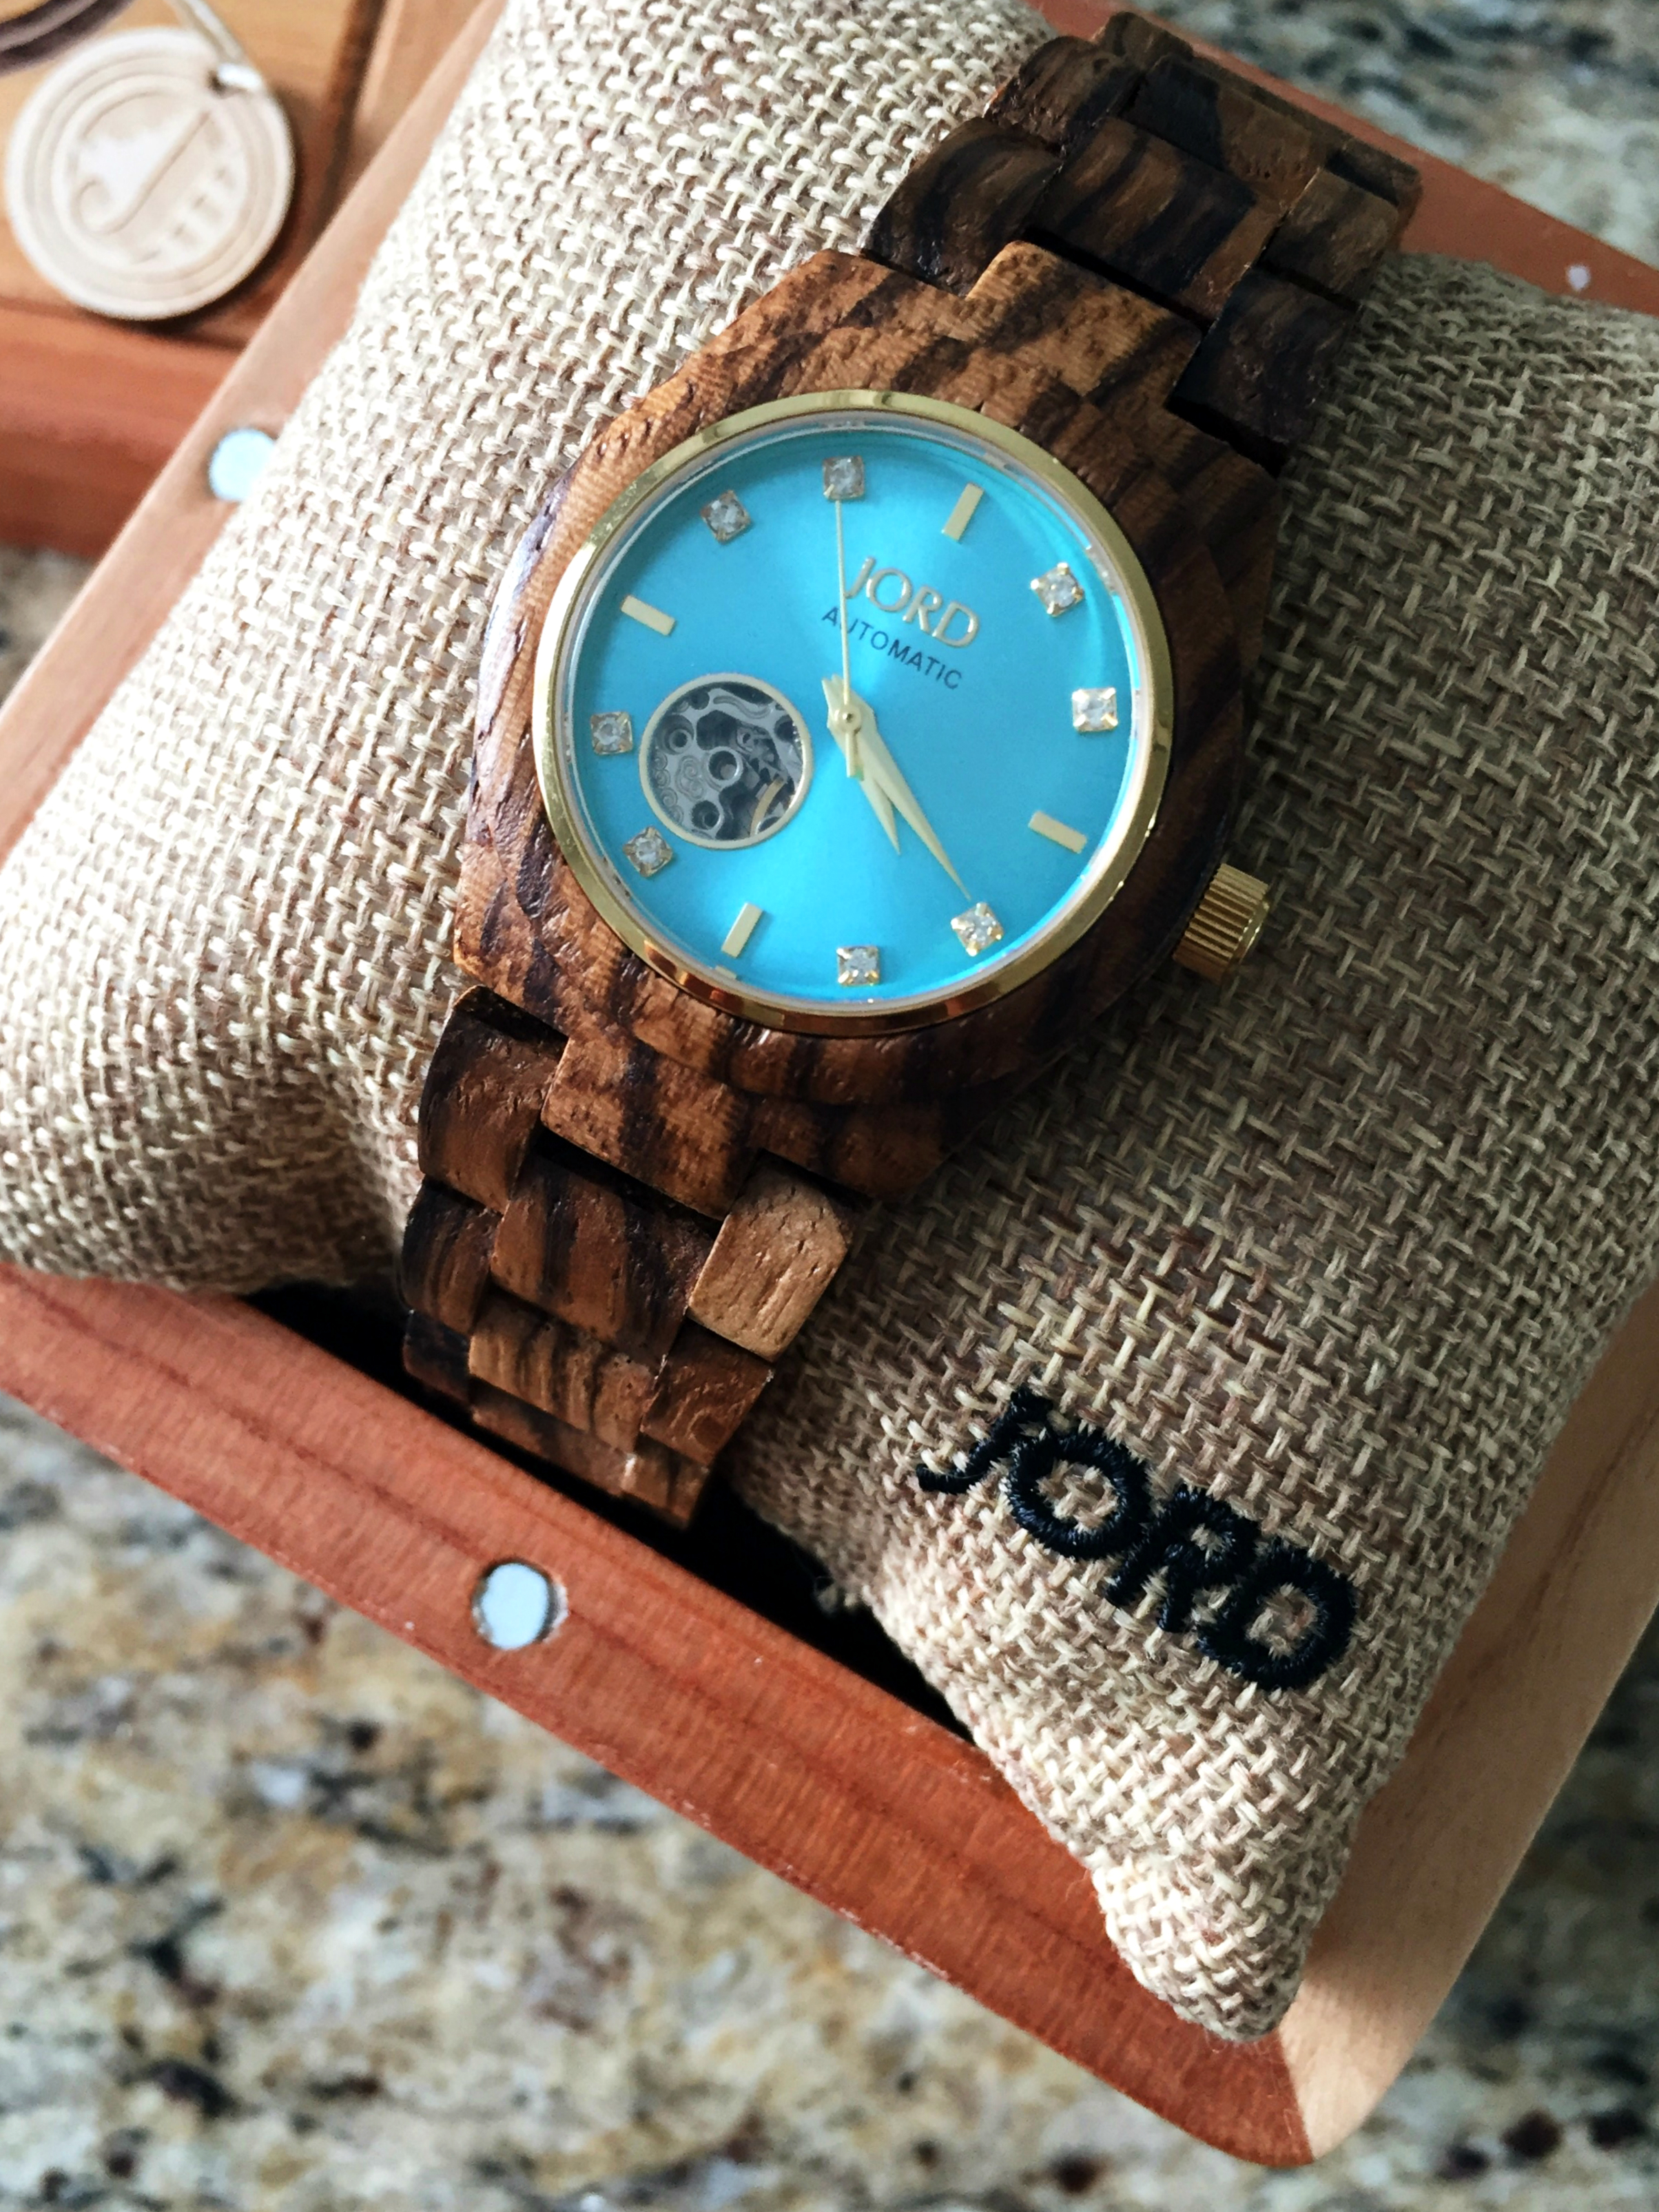 jord watches, jord cora watch, zebrawood watch, turquoise face watch, gorgeous watches, cute watches, summer watch styles